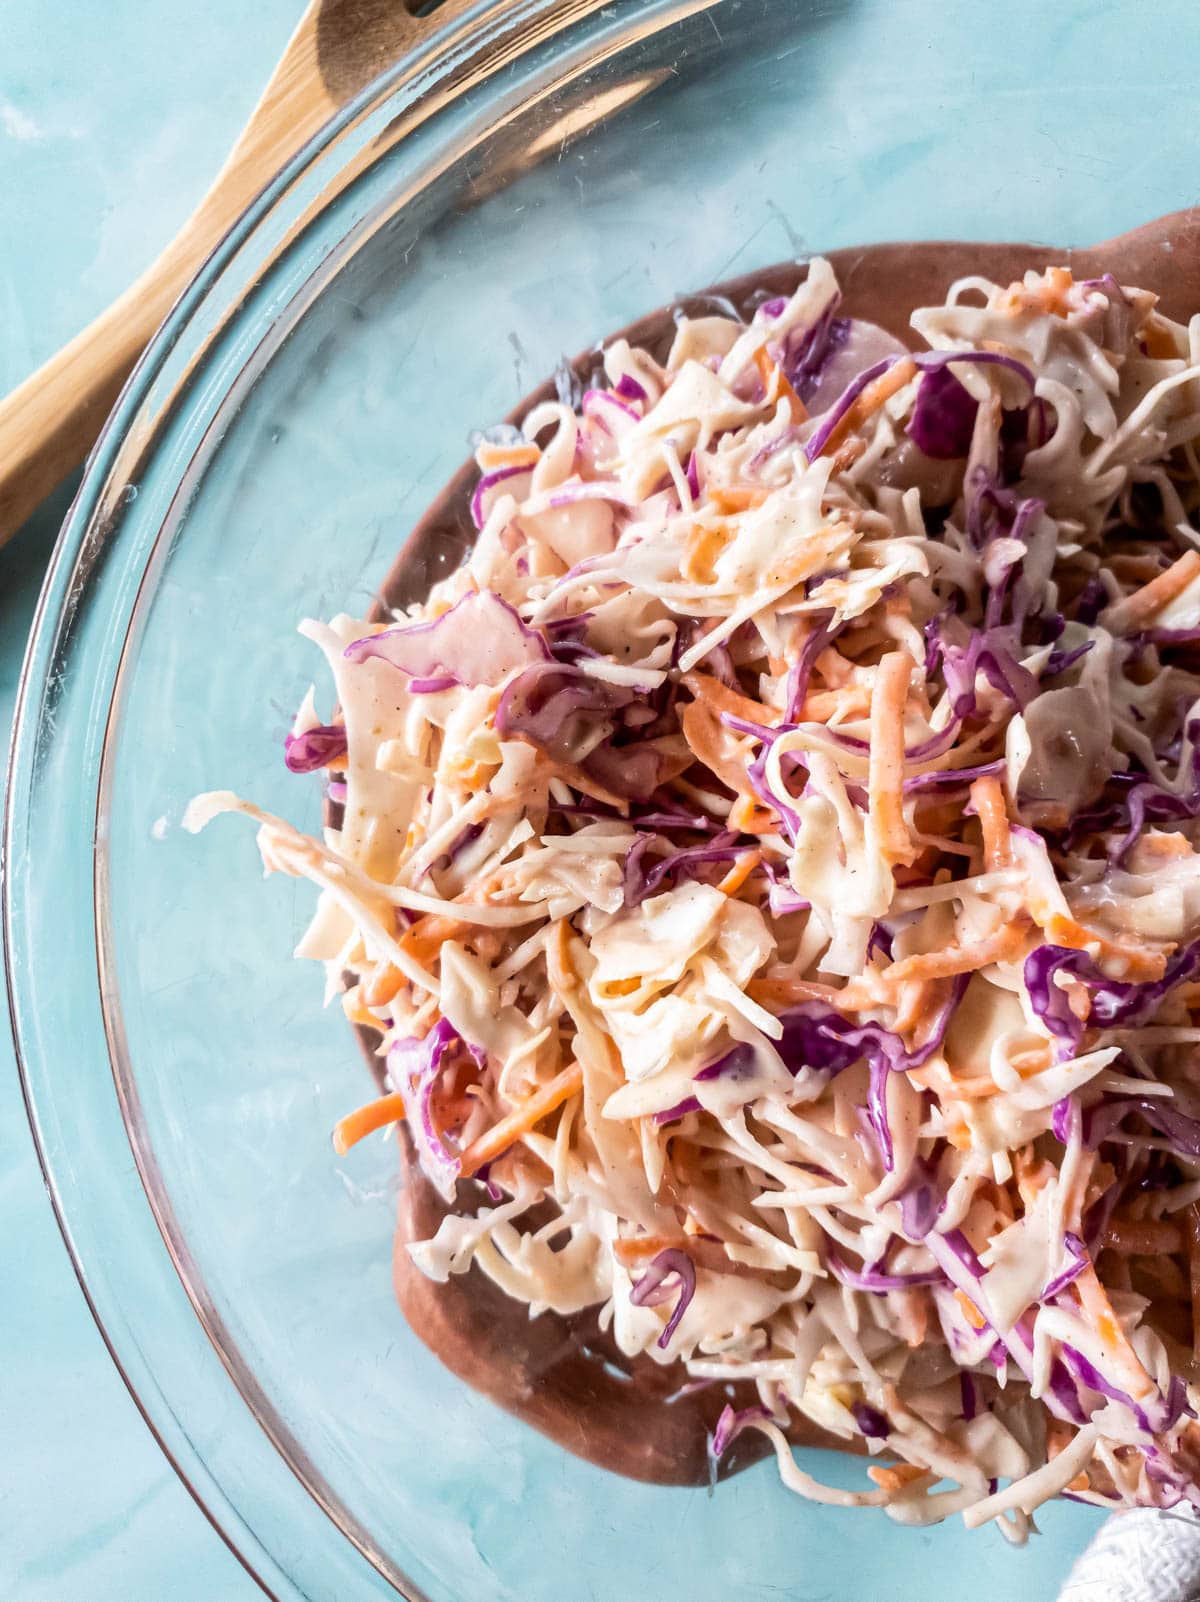 A picture of sugar-free coleslaw in glass bowl on blue background.